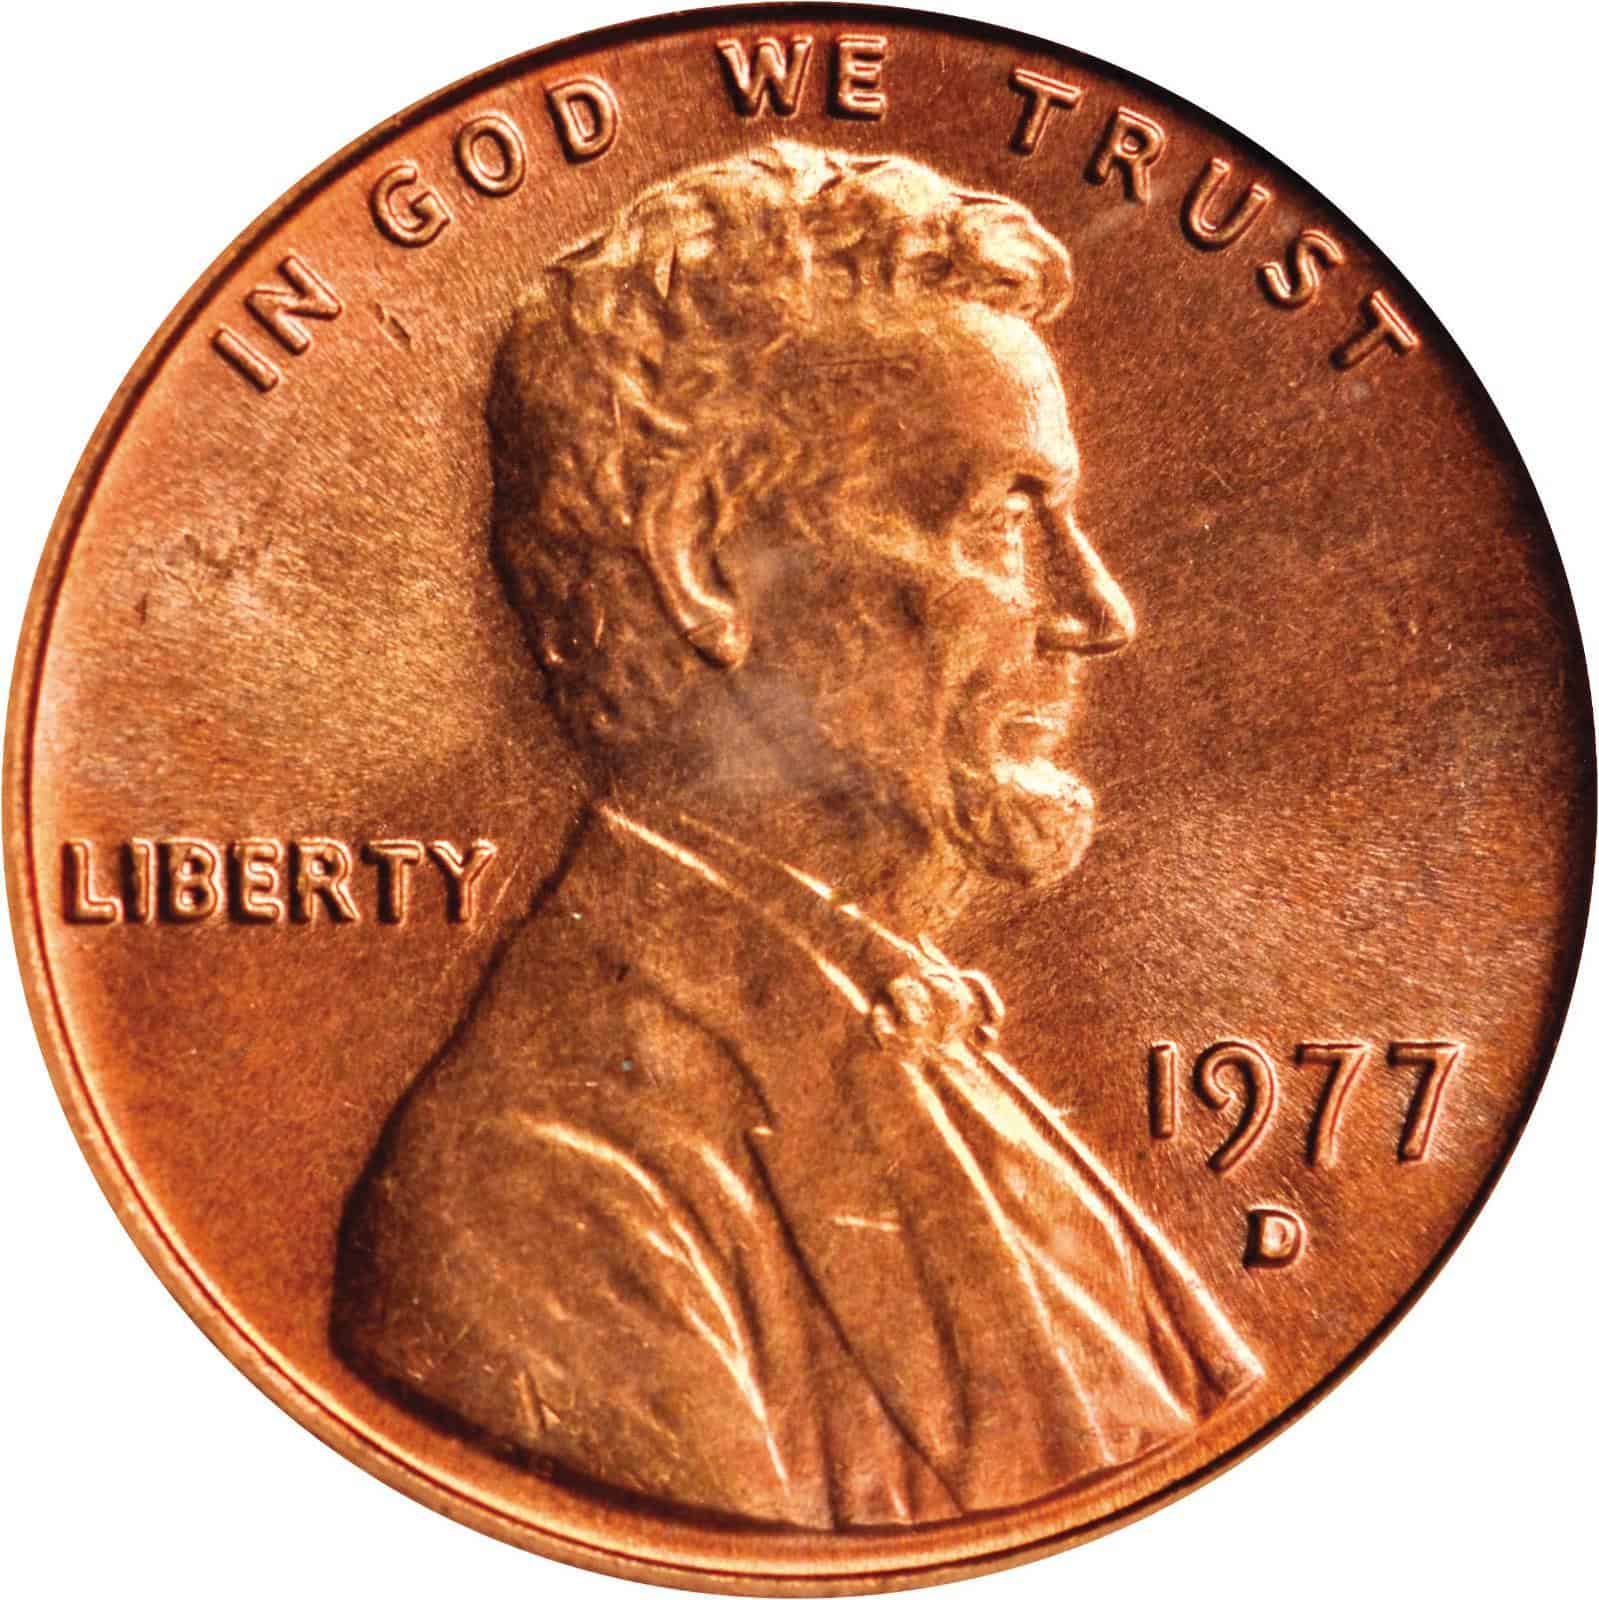 The obverse of the 1977 Lincoln penny